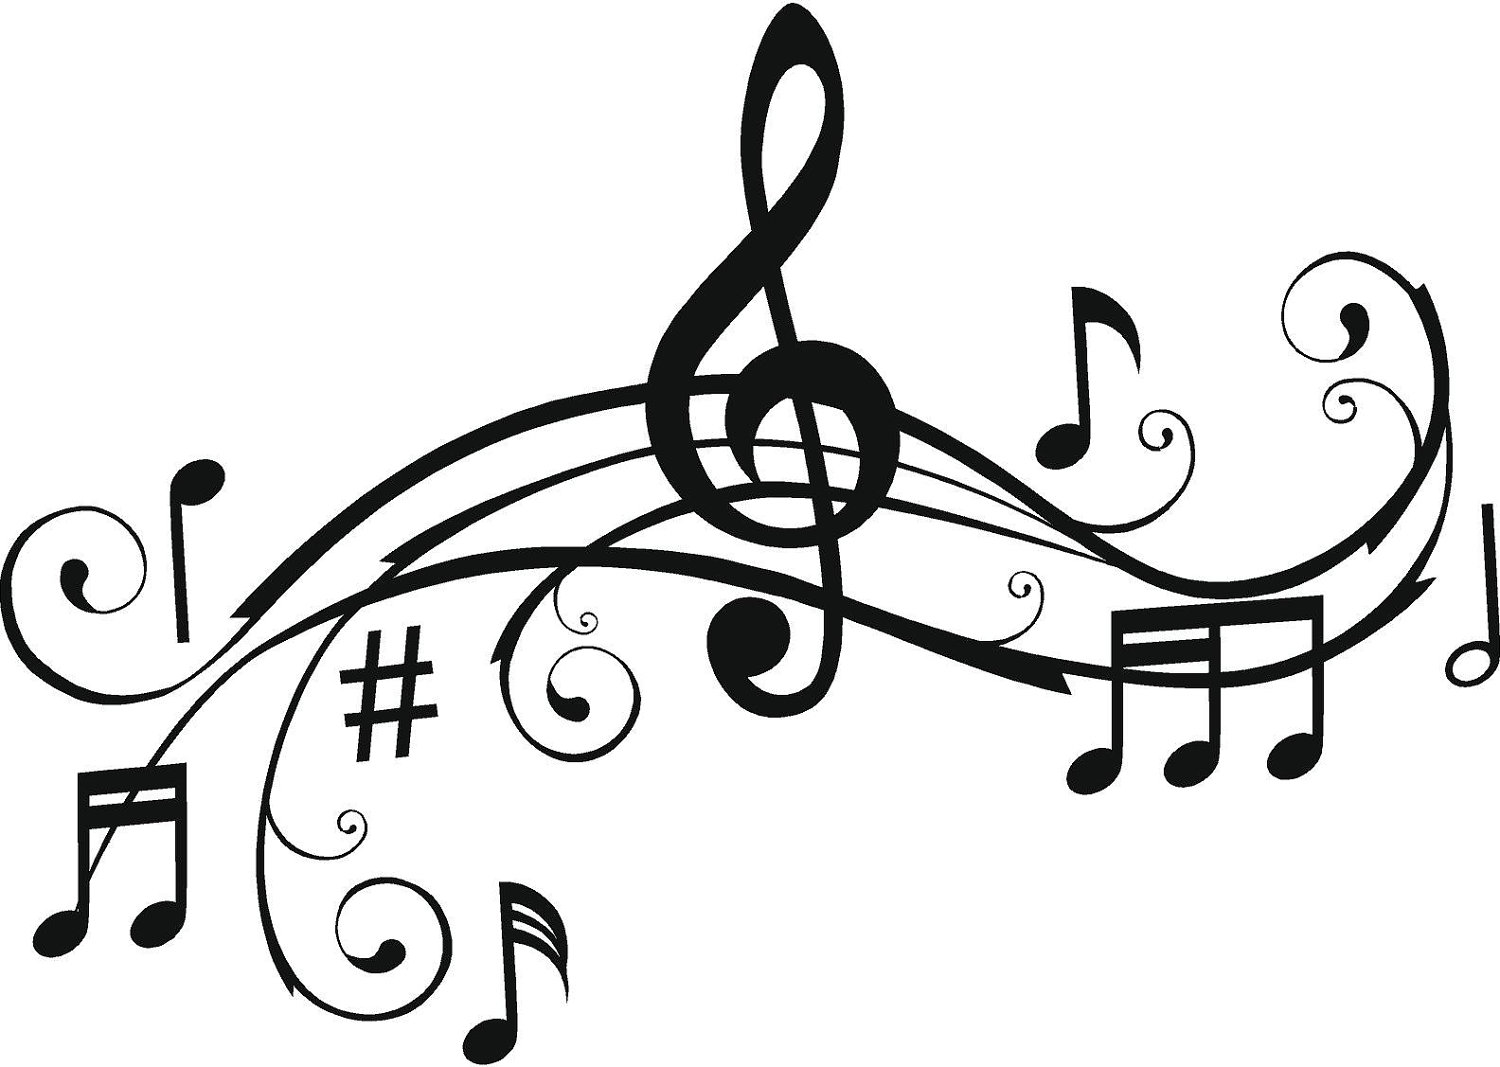 coloring pages of music notes